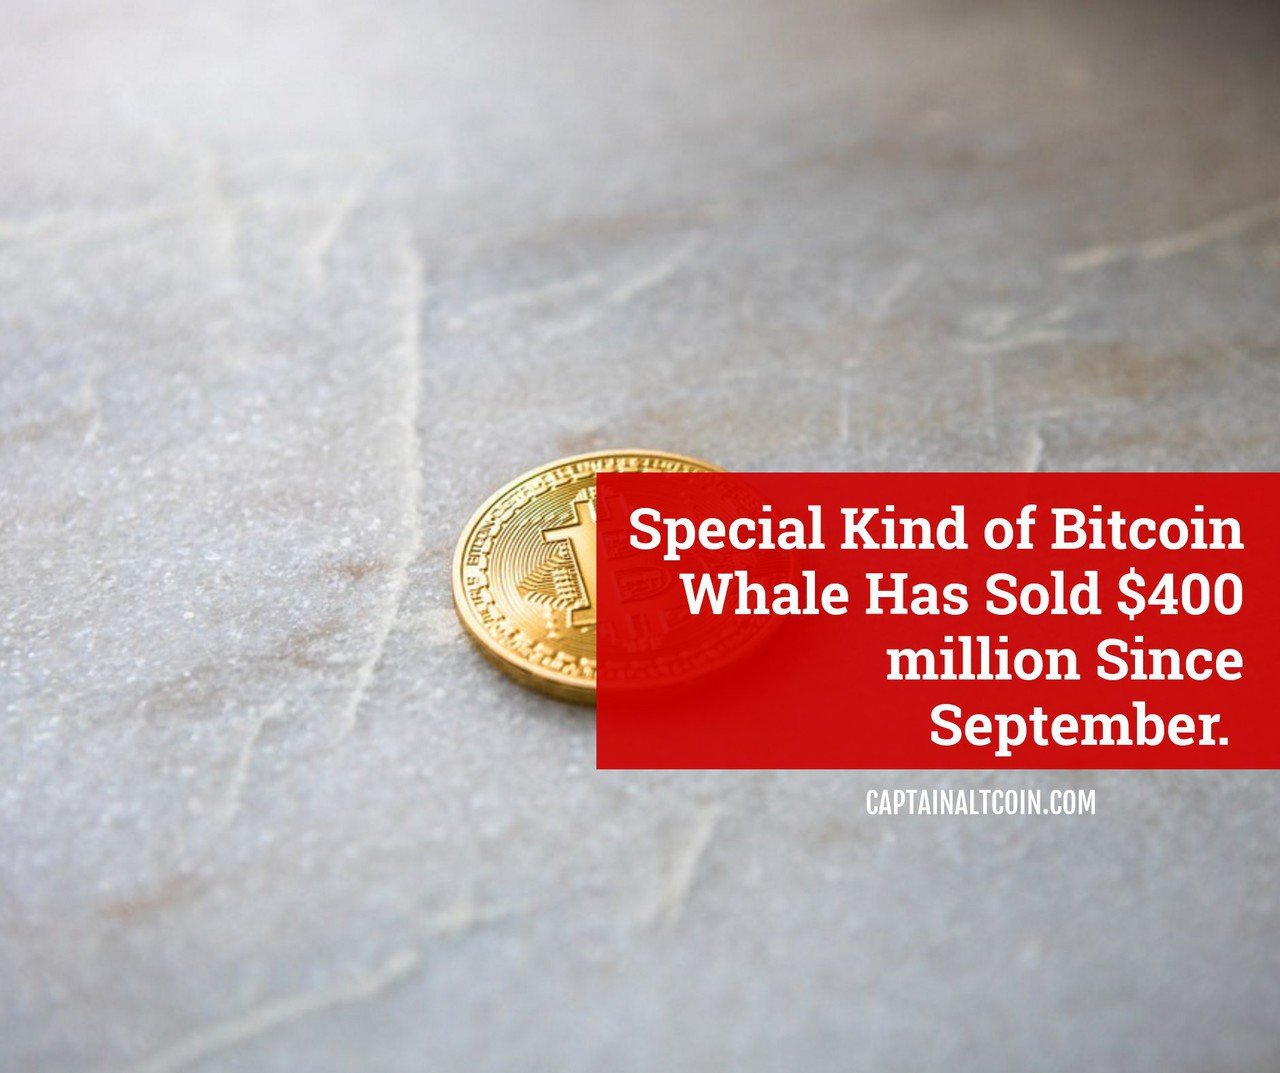 Special Kind of Bitcoin Whale Has Sold $400 million Since September.